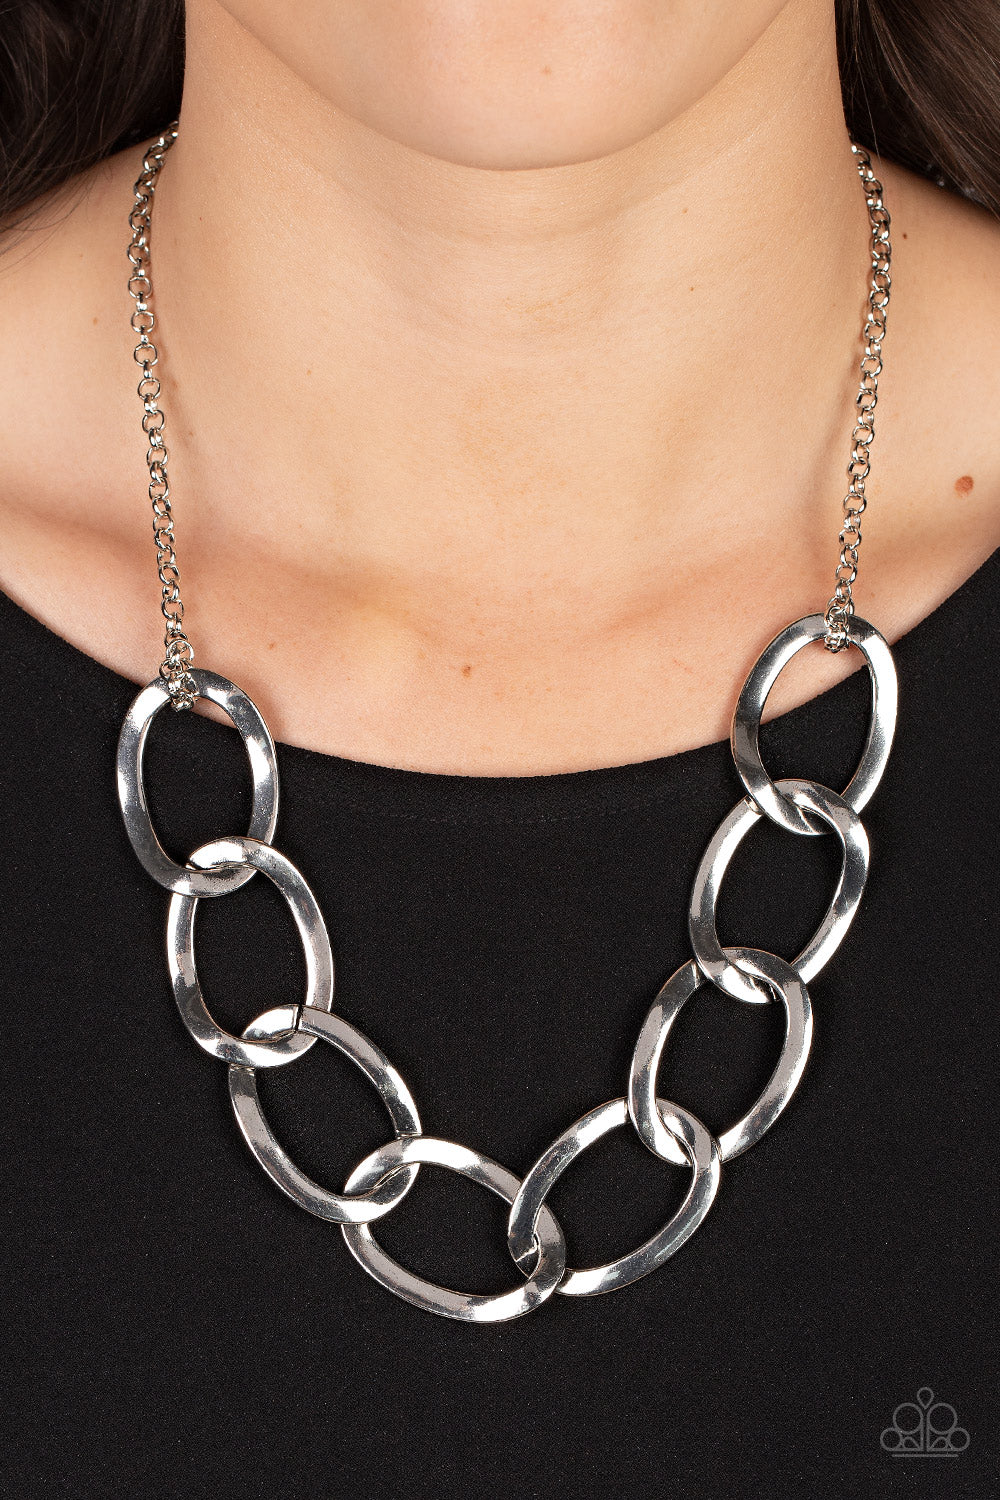 I've Got the Power - Silver Necklace - Paparazzi Accessories